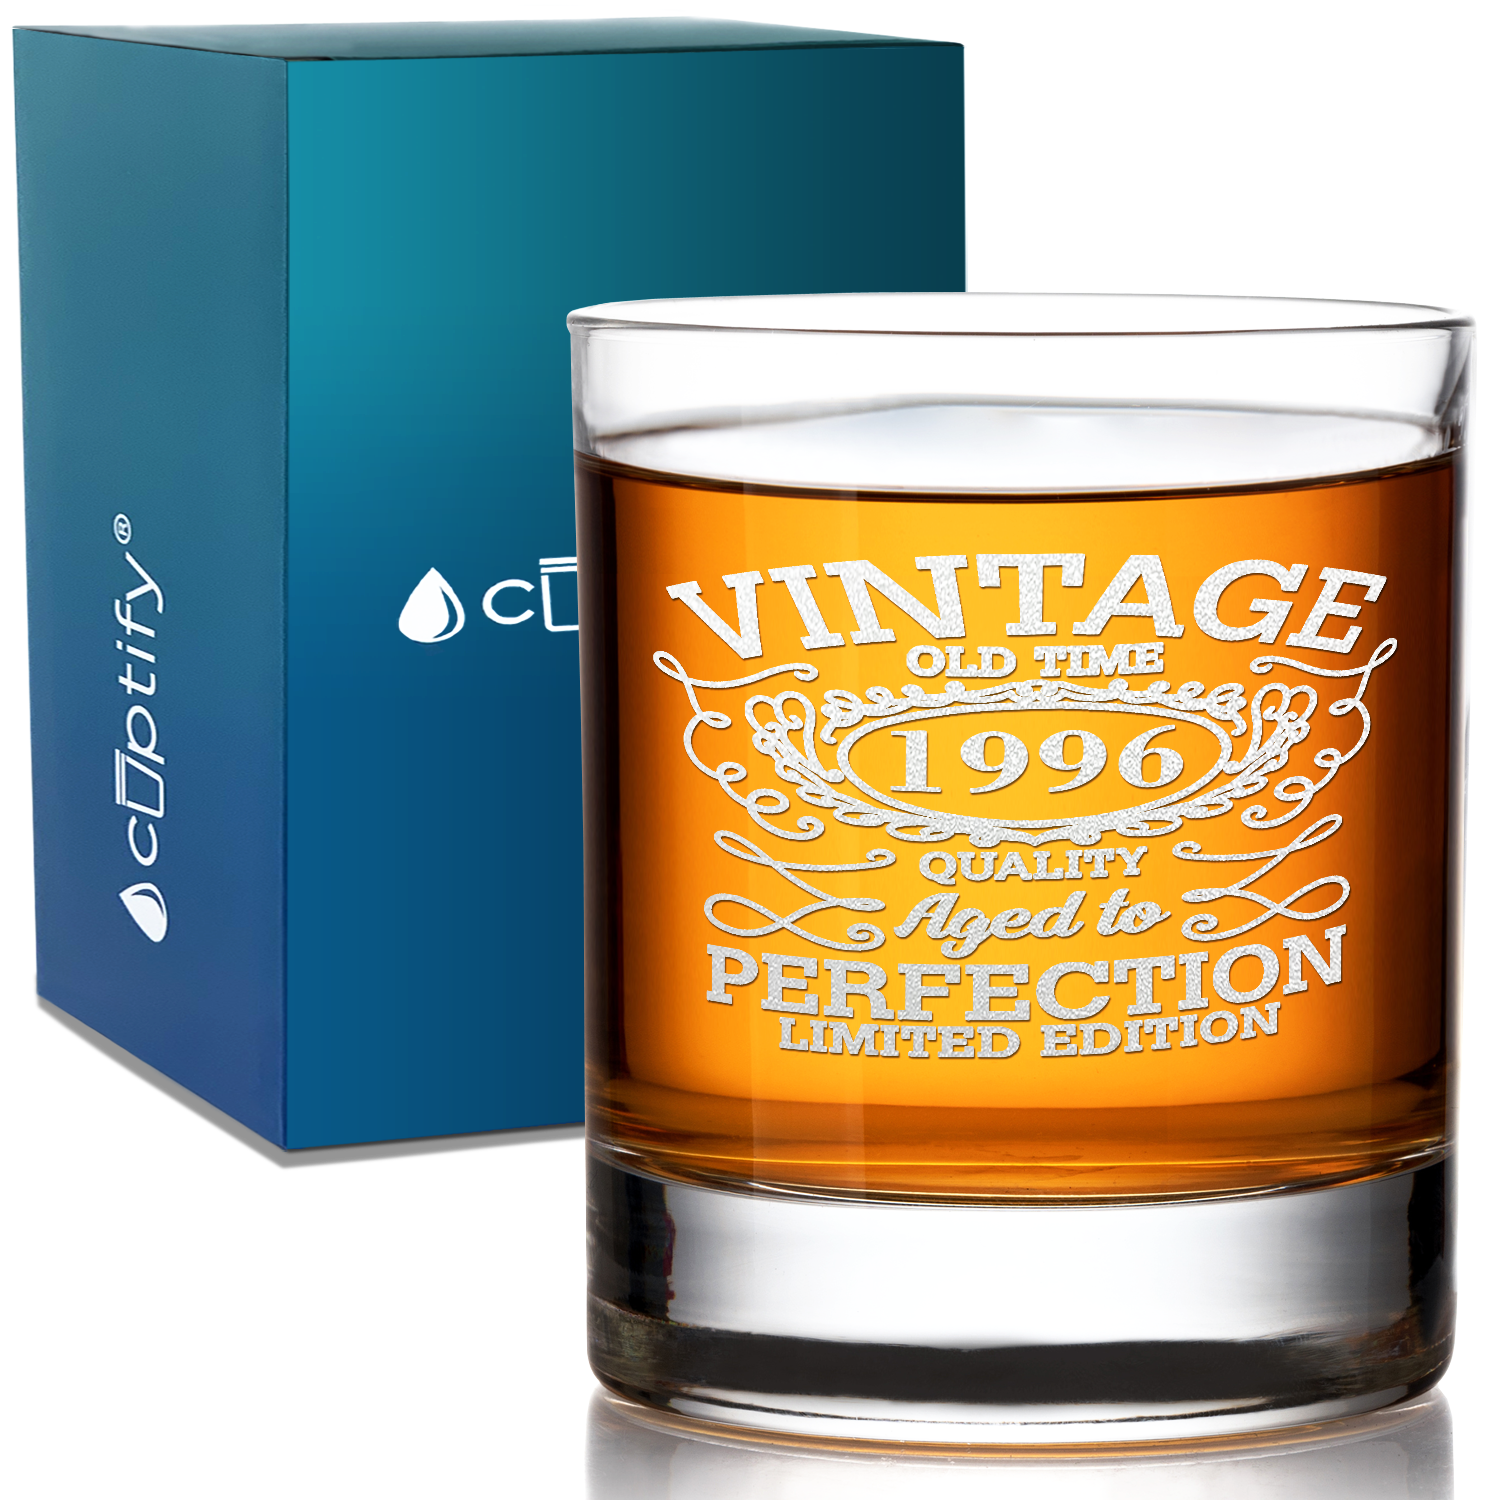 25th Birthday Vintage 25 Years Old Time 1996 Quality Laser Engraved 10.25oz Old Fashion Glass